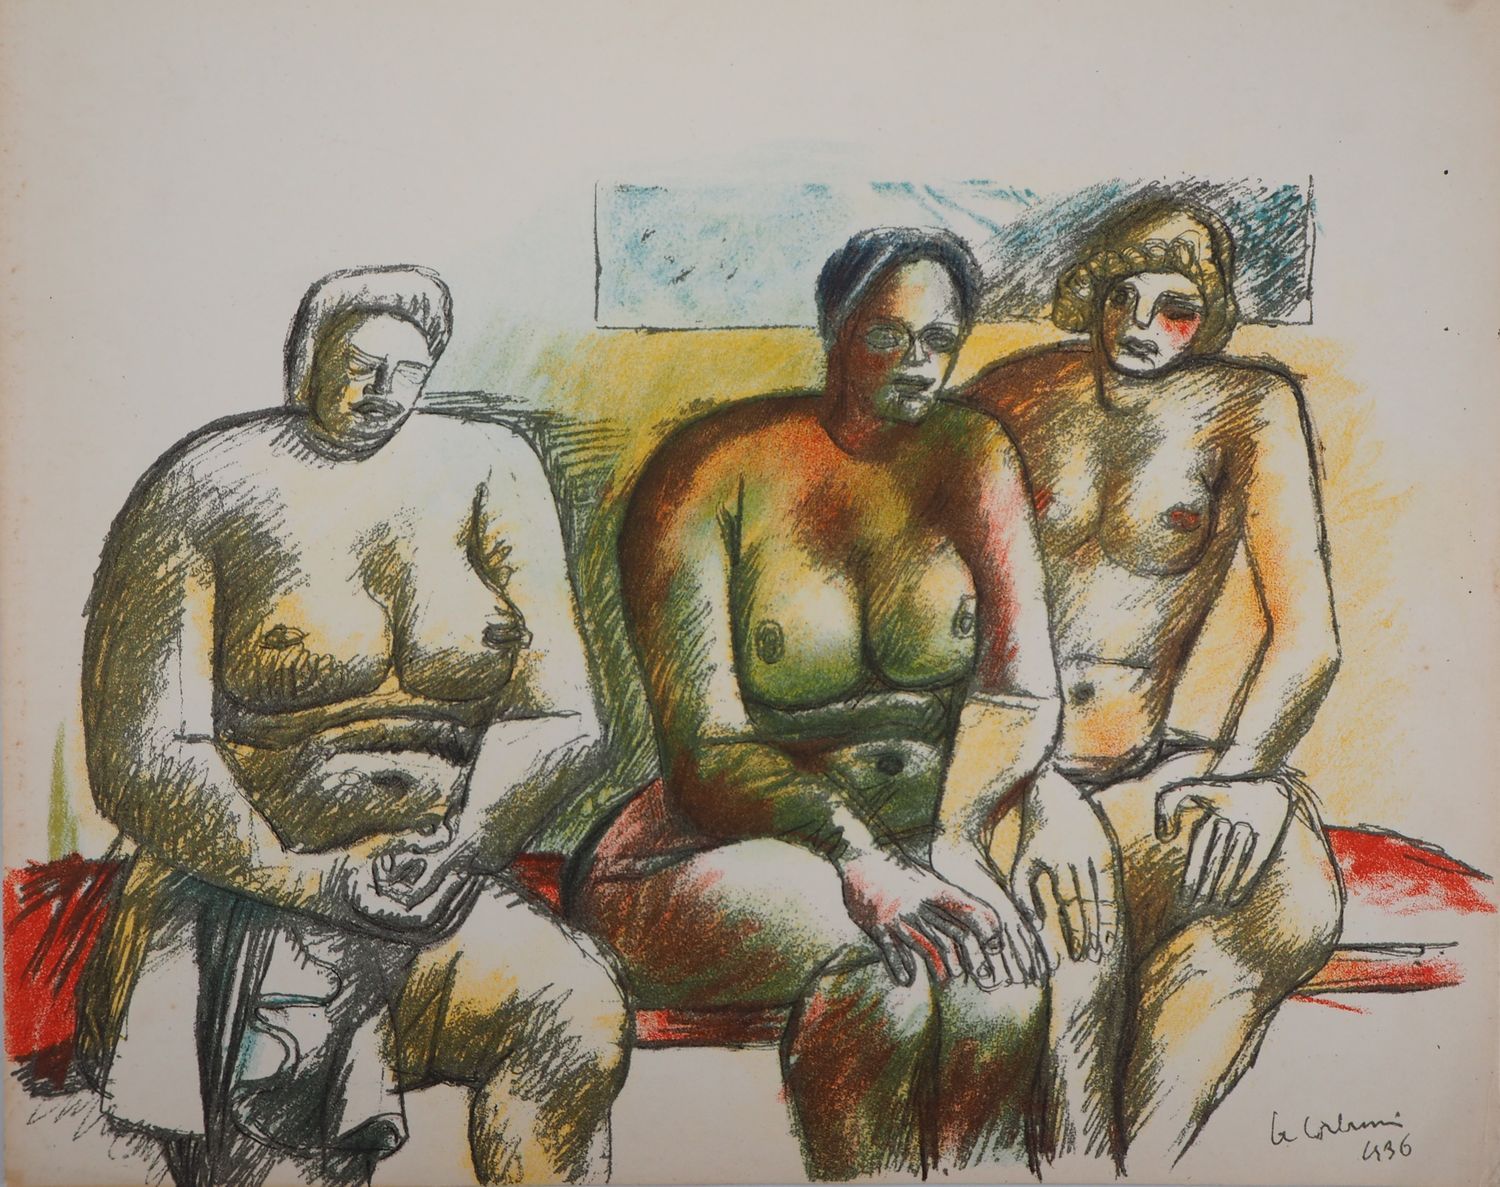 Le Corbusier Le Corbusier

Three nudes, 1938

Lithograph

Signed in the plate

O&hellip;